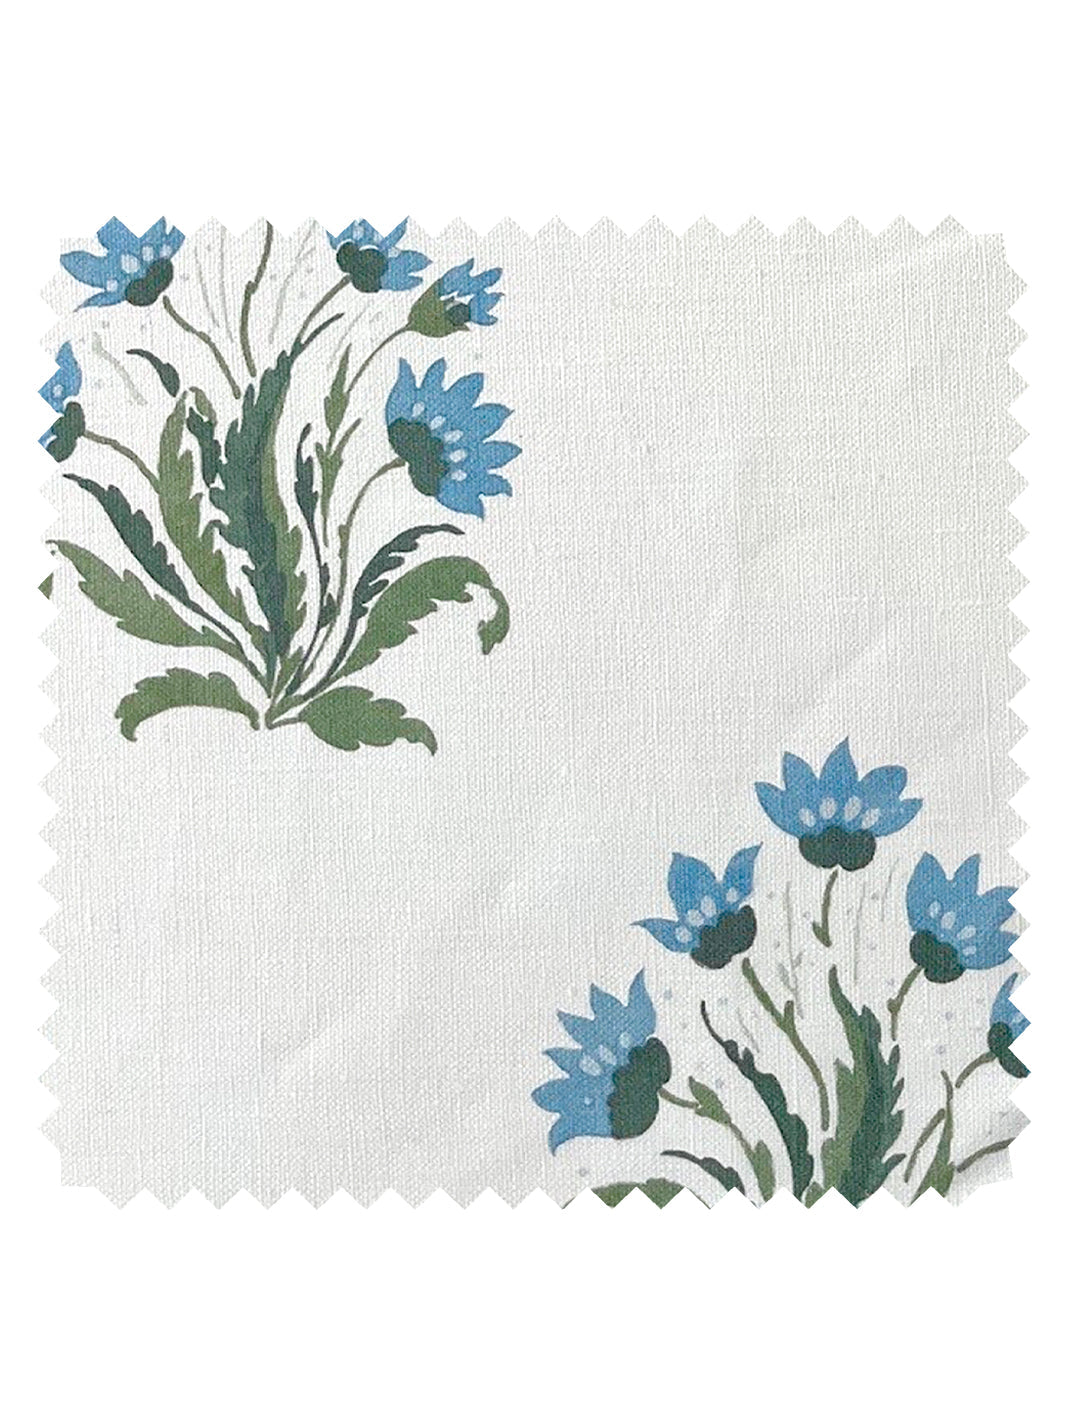 'Hillhouse Block Print Small' Linen Fabric by Nathan Turner - Blue Green